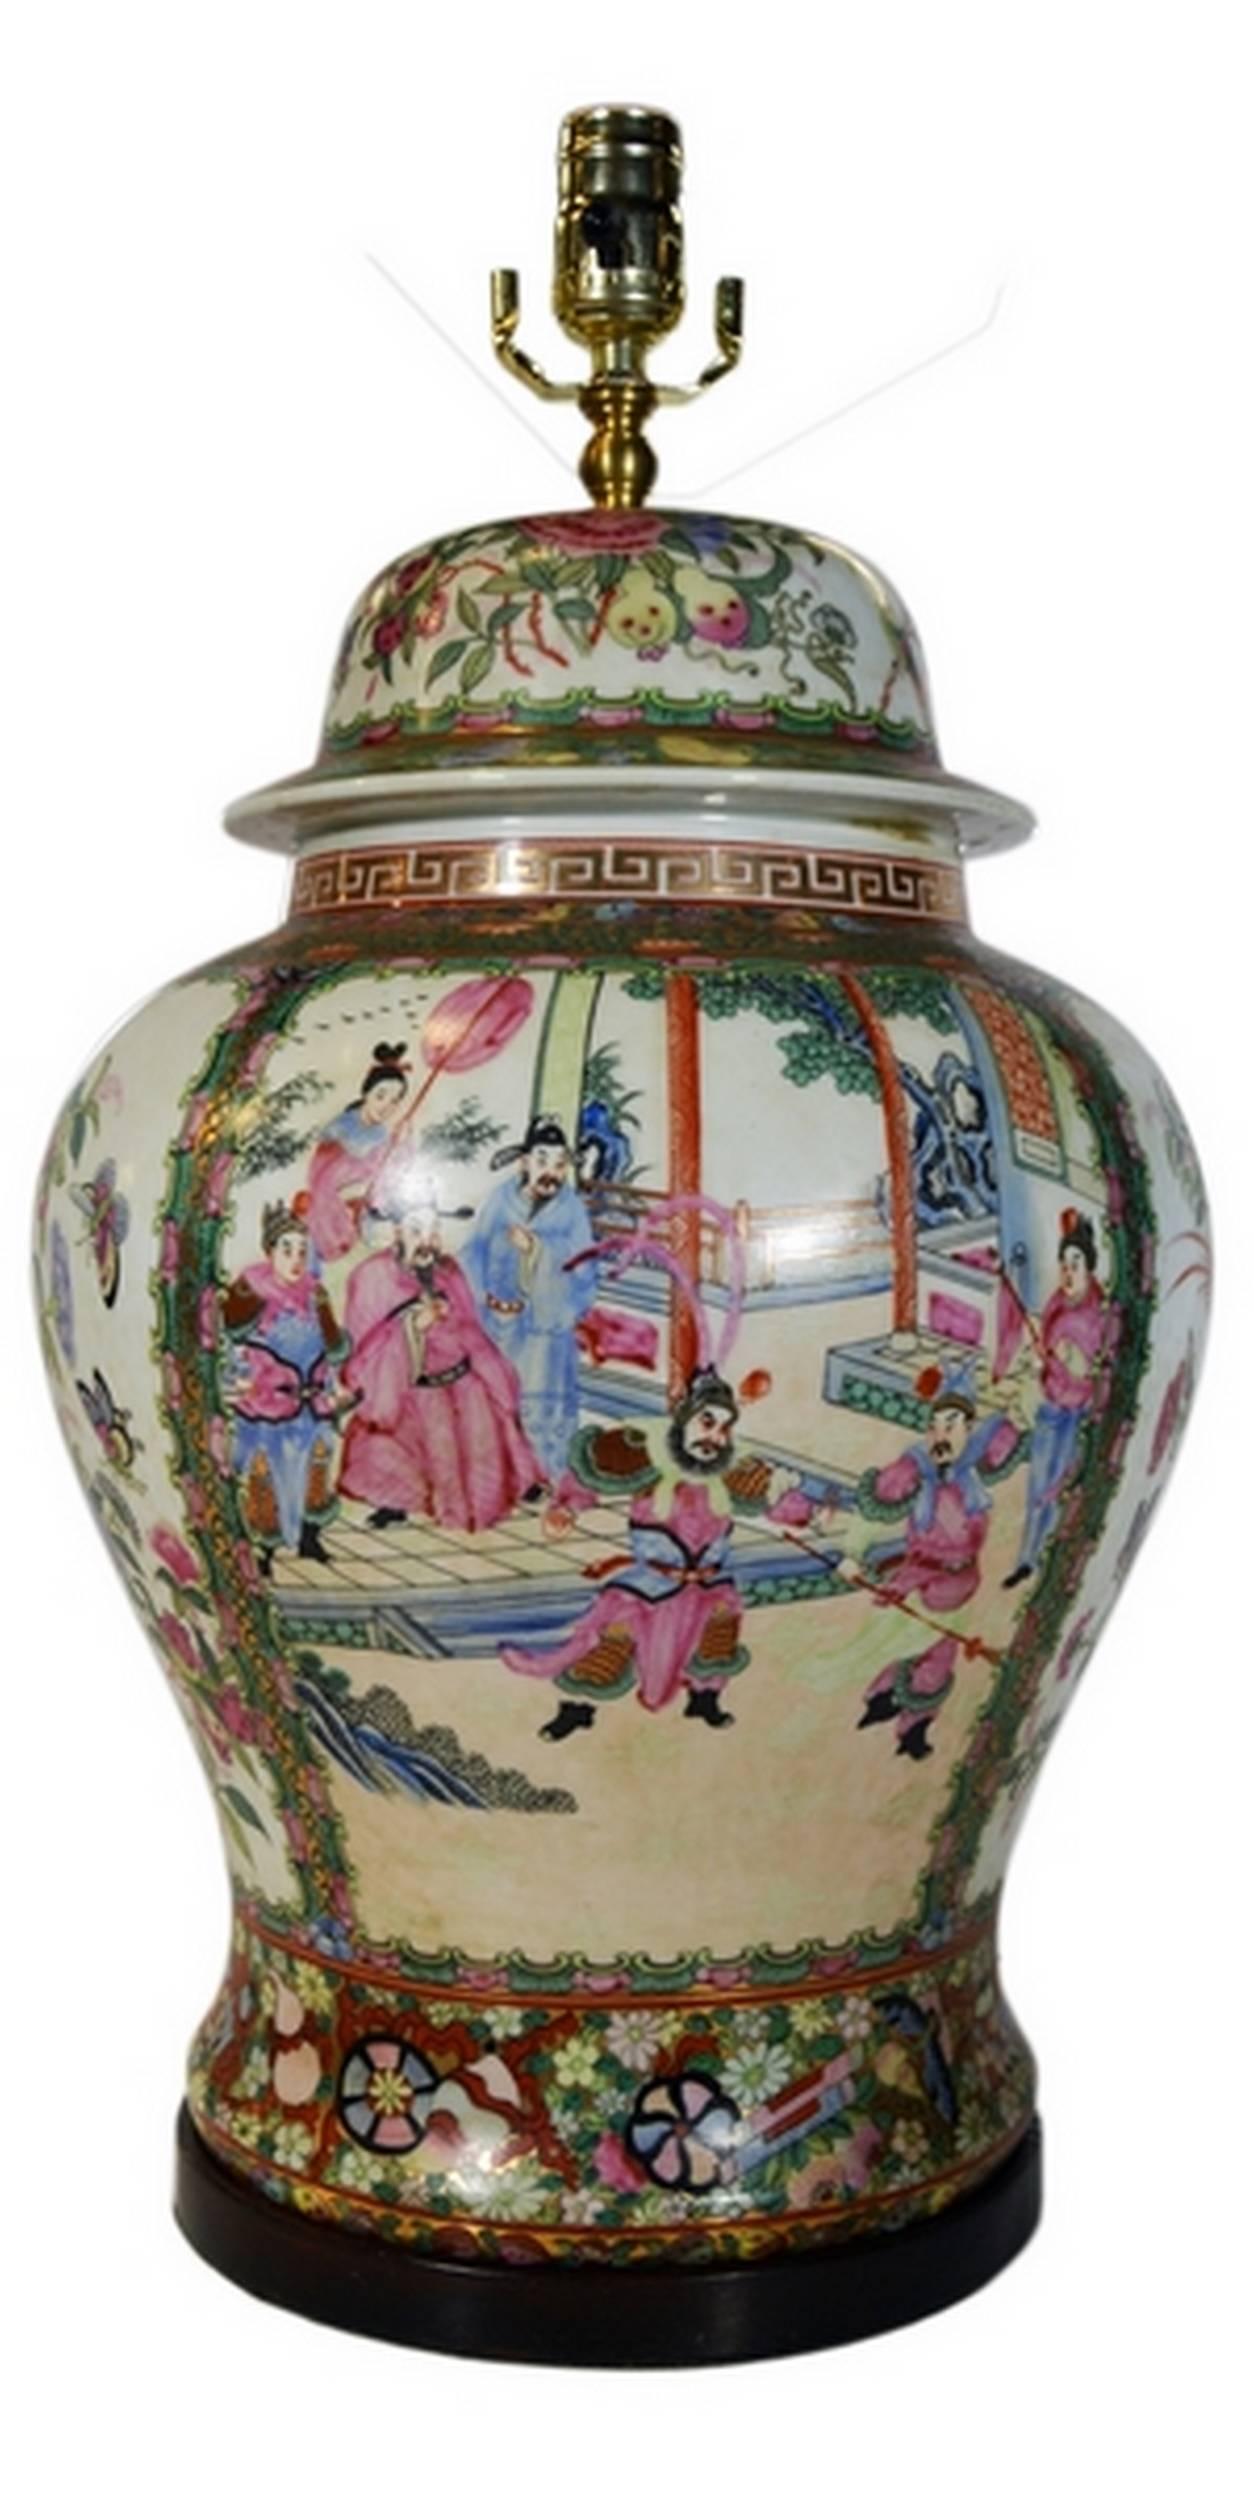 A vintage Chinese porcelain lamp showcasing a hand-painted flower and birds scene. This lamp adopts an elegant and typically Chinese bulbous shape and is decorated with a variety of scenes. One side displays a flower and bird composition, both of